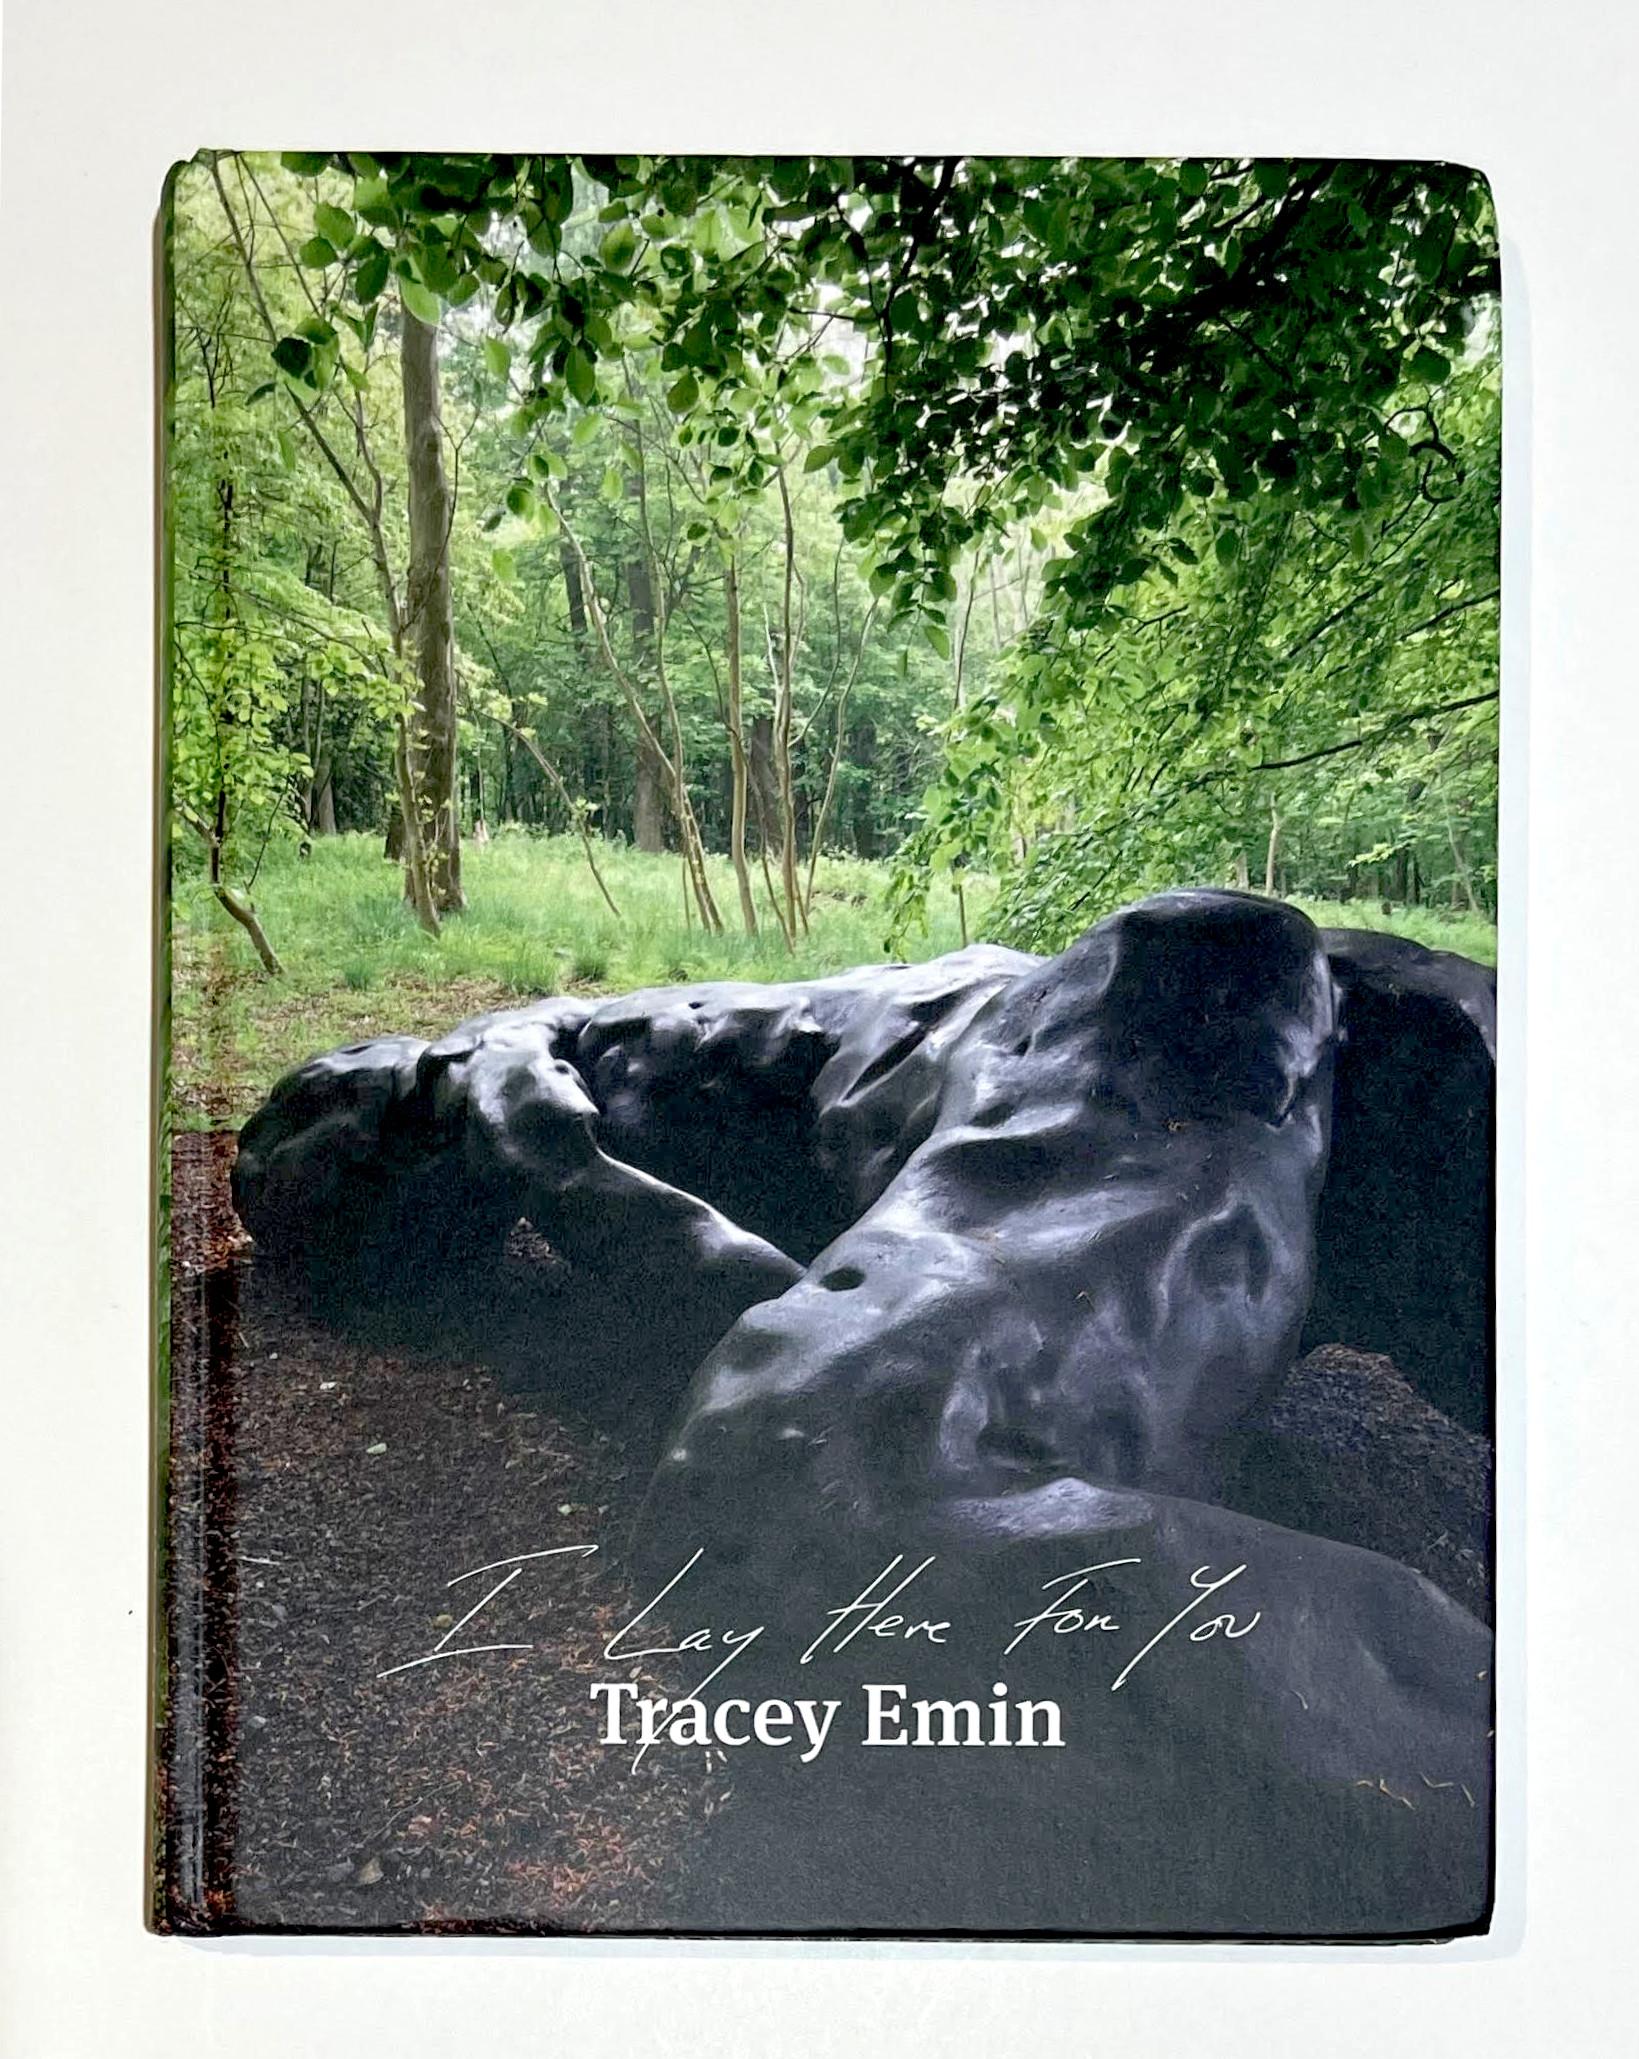 Tracey Emin: I Lay Here For You (Hand signed and dated book), 2022
Hardback monograph (hand signed and dated by Tracey Emin) on Munken Lynx Smooth Natural White 170 gsm with endpapers of Colorplan Candy Pink 135 gsm; matt laminate printed cover with